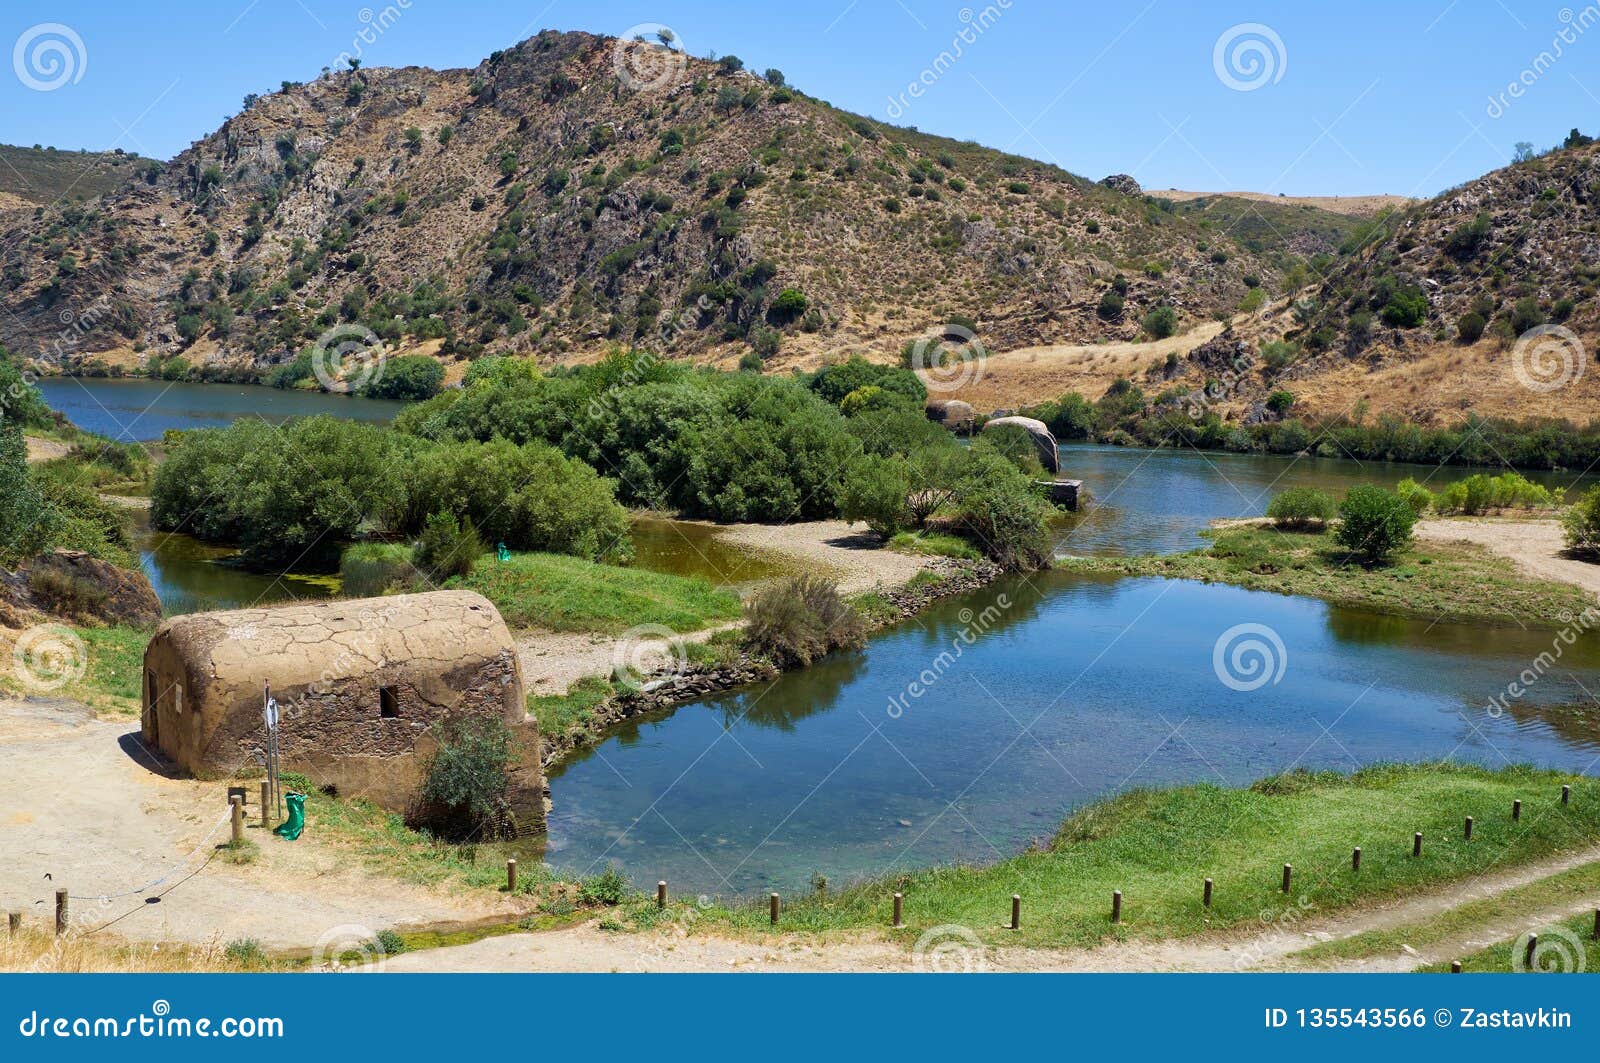 old traditional watermills in the guadiana river at azenhas. mertola. portugal